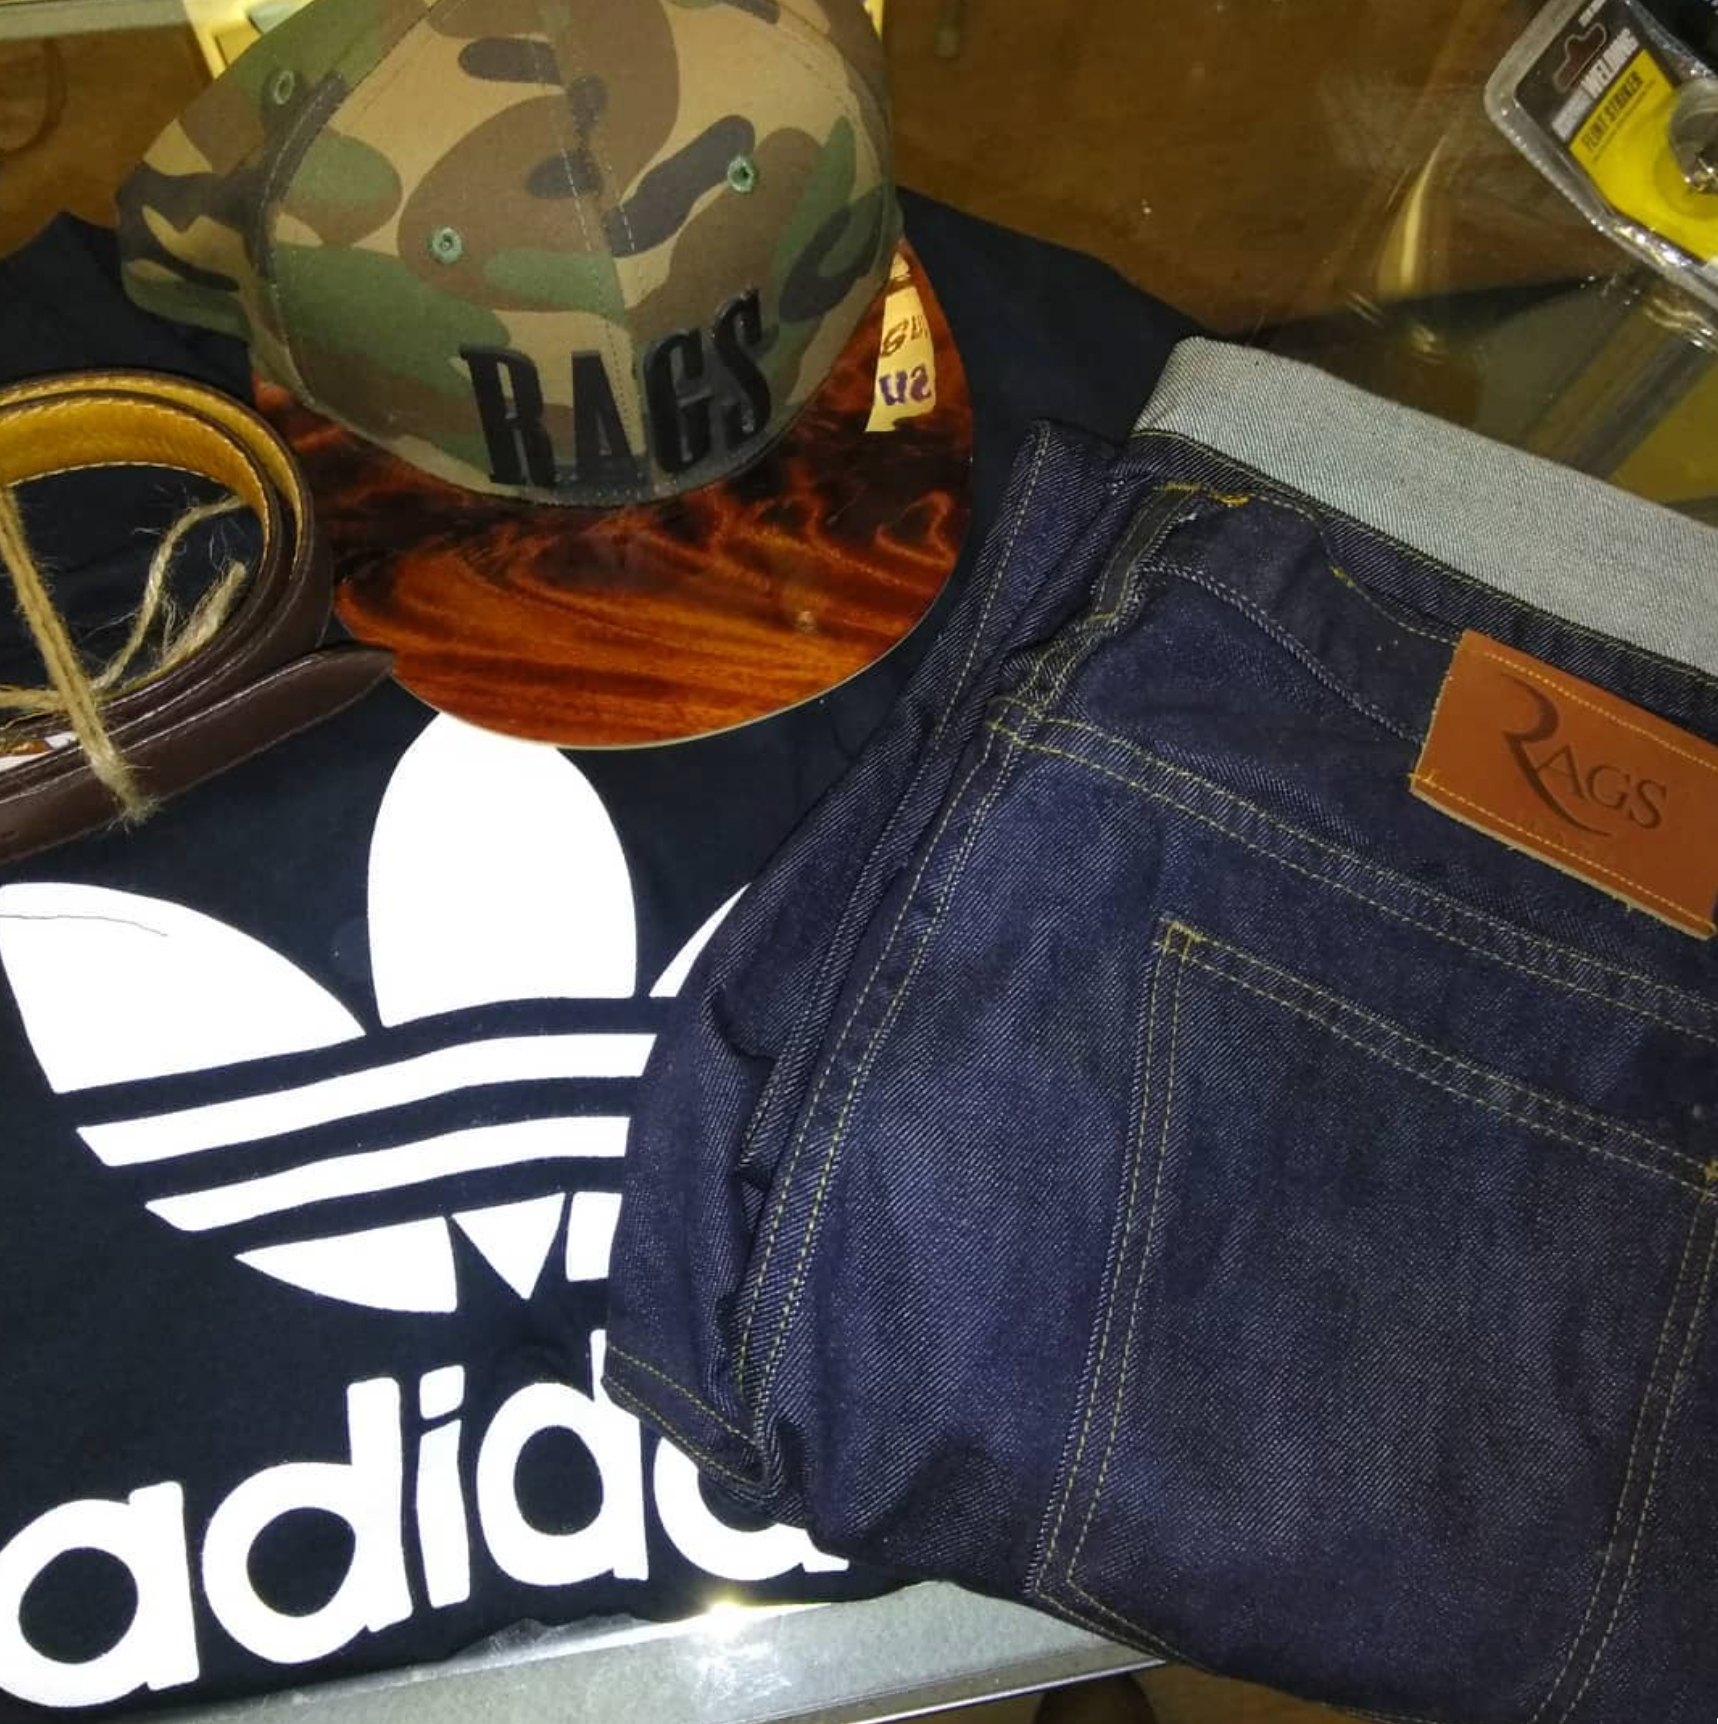 a pair of jeans, a hat, and other items are on a table.